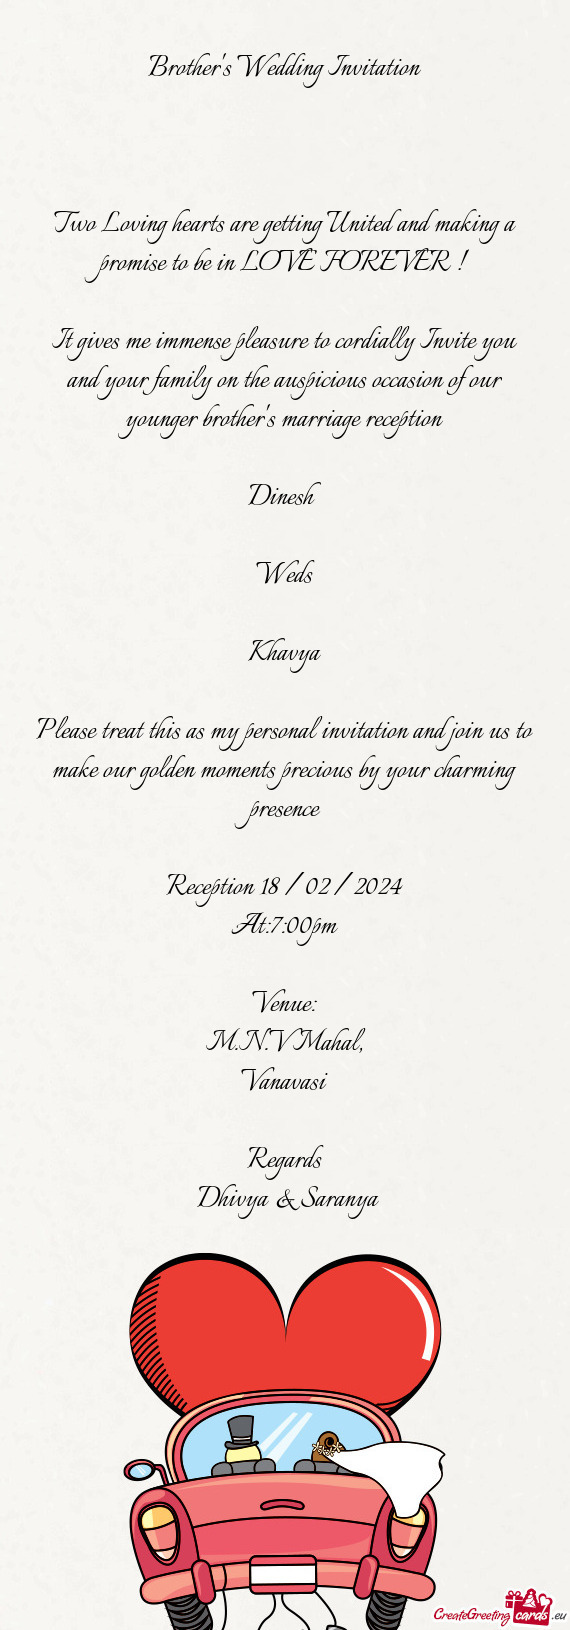 In LOVE FOREVER !  It gives me immense pleasure to cordially Invite you and your family on the au